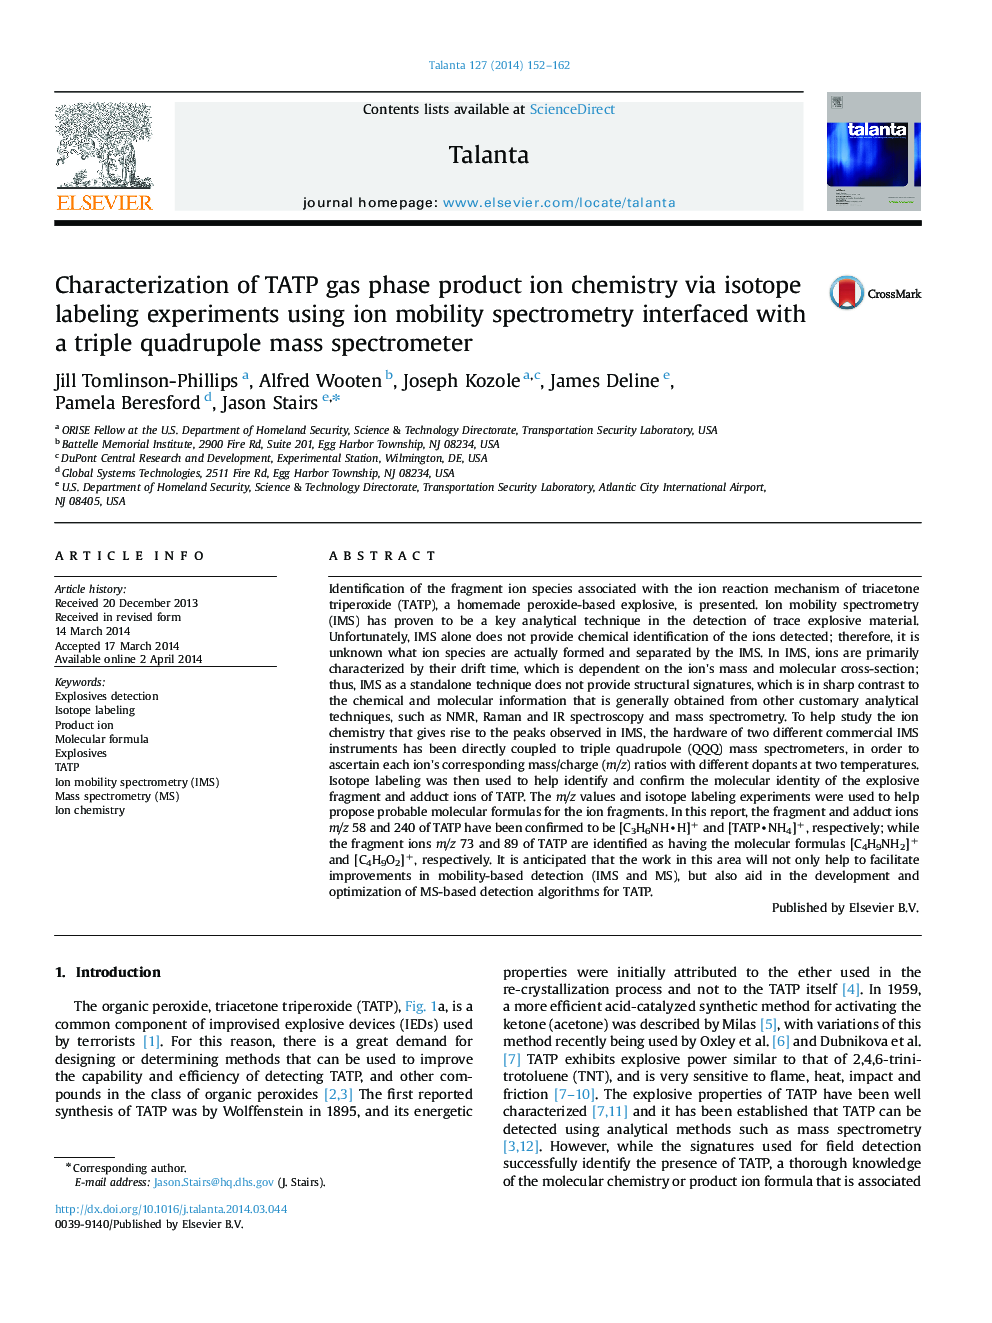 Characterization of TATP gas phase product ion chemistry via isotope labeling experiments using ion mobility spectrometry interfaced with a triple quadrupole mass spectrometer